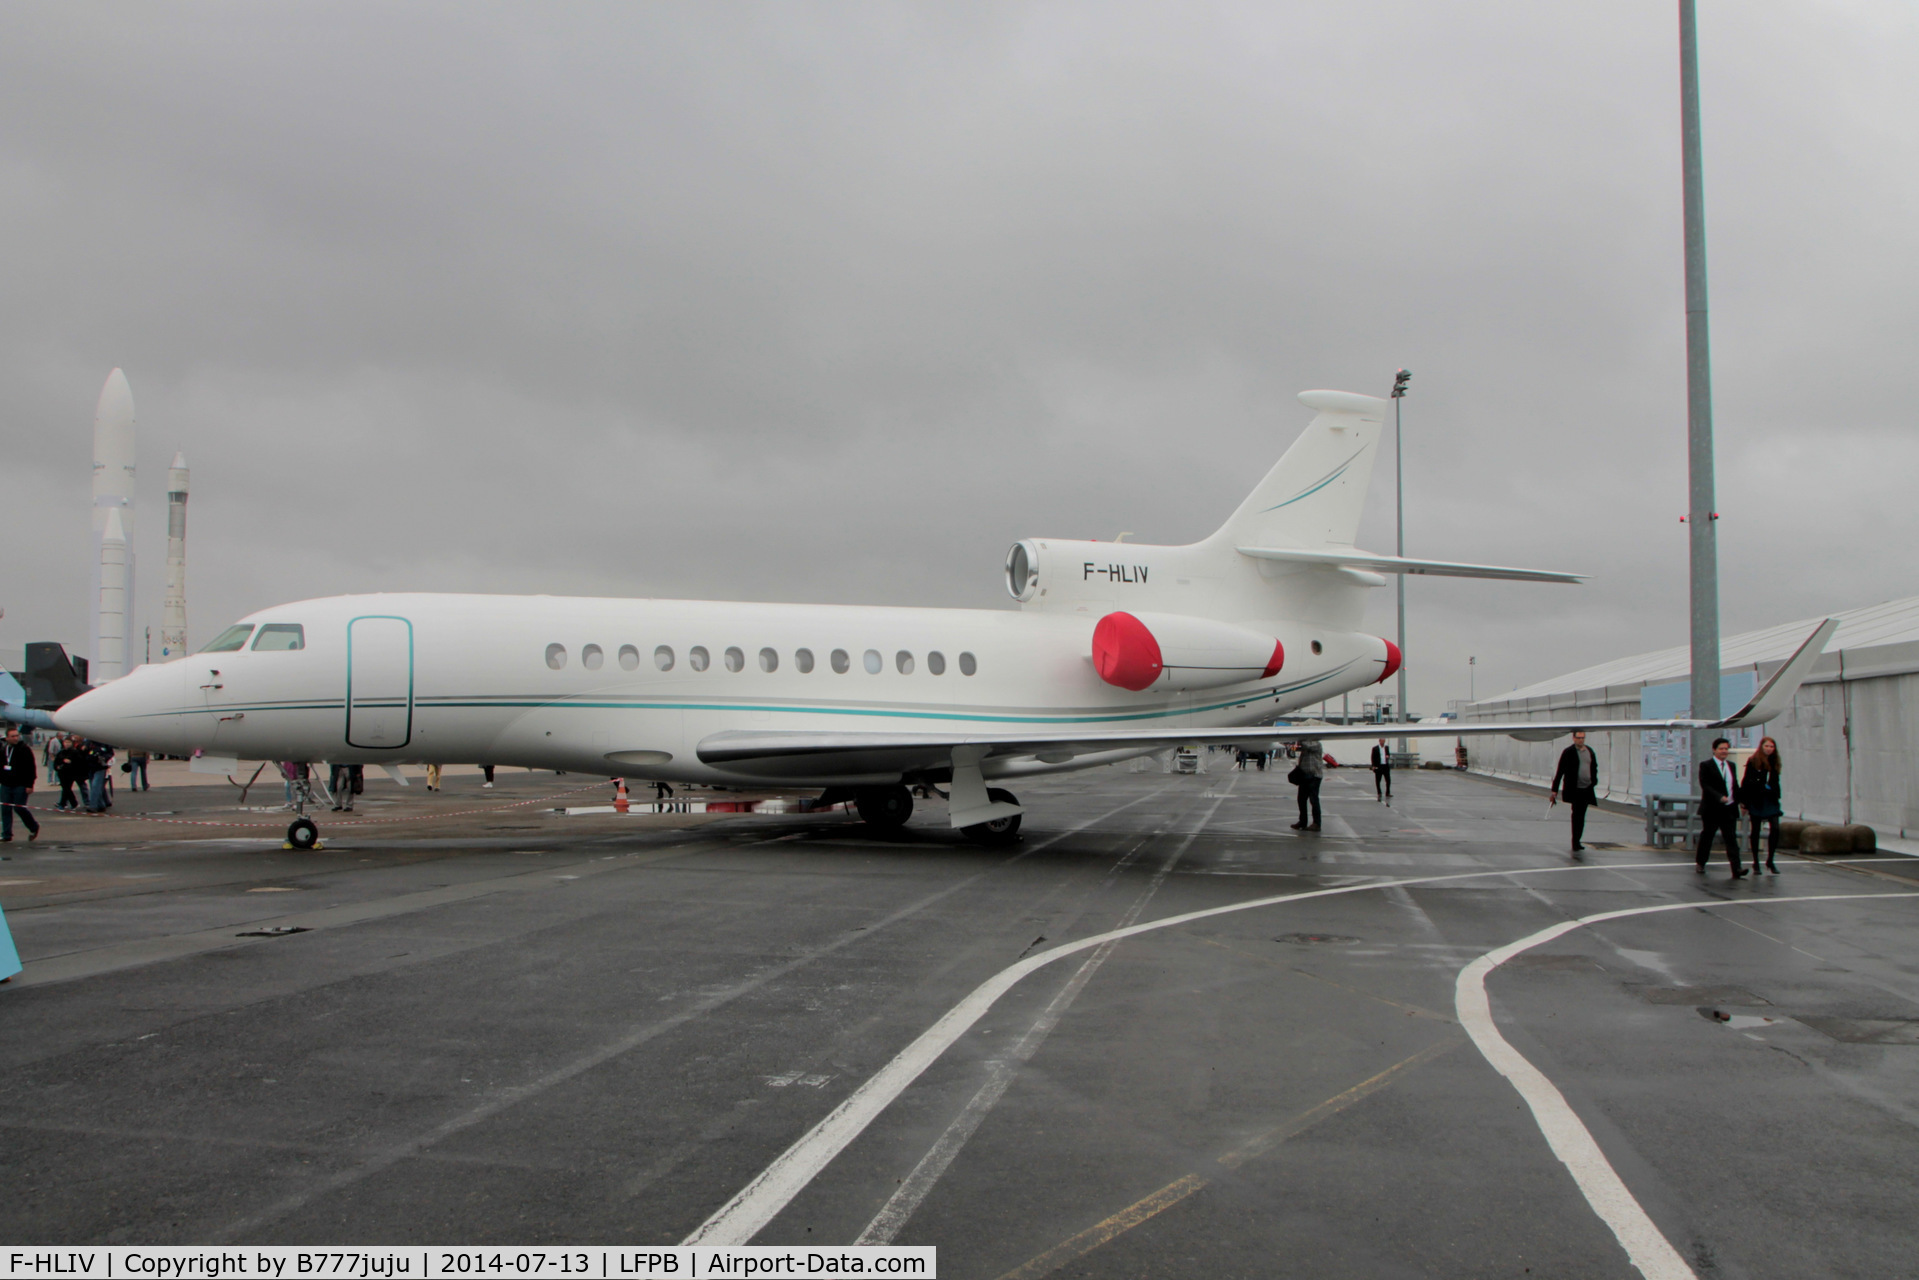 F-HLIV, 2009 Dassault Falcon 7X C/N 054, at 100th anniversary of Le Bourget Airport